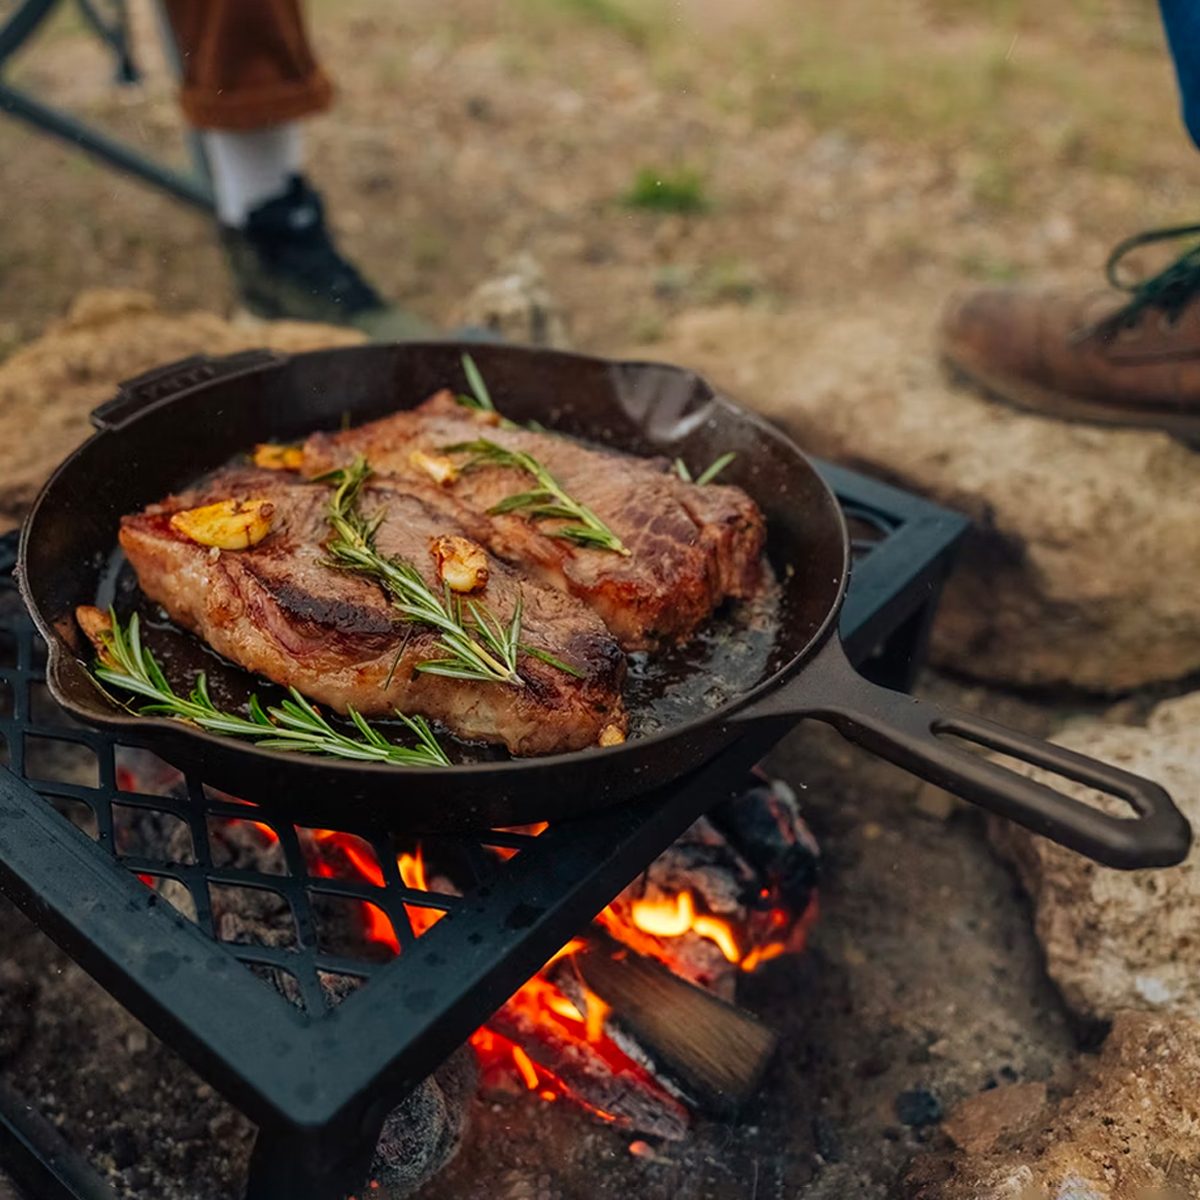 Yeti's $400 Cast Iron Skillet Sold Out in Less Than 24 Hours—But It's Back in Stock